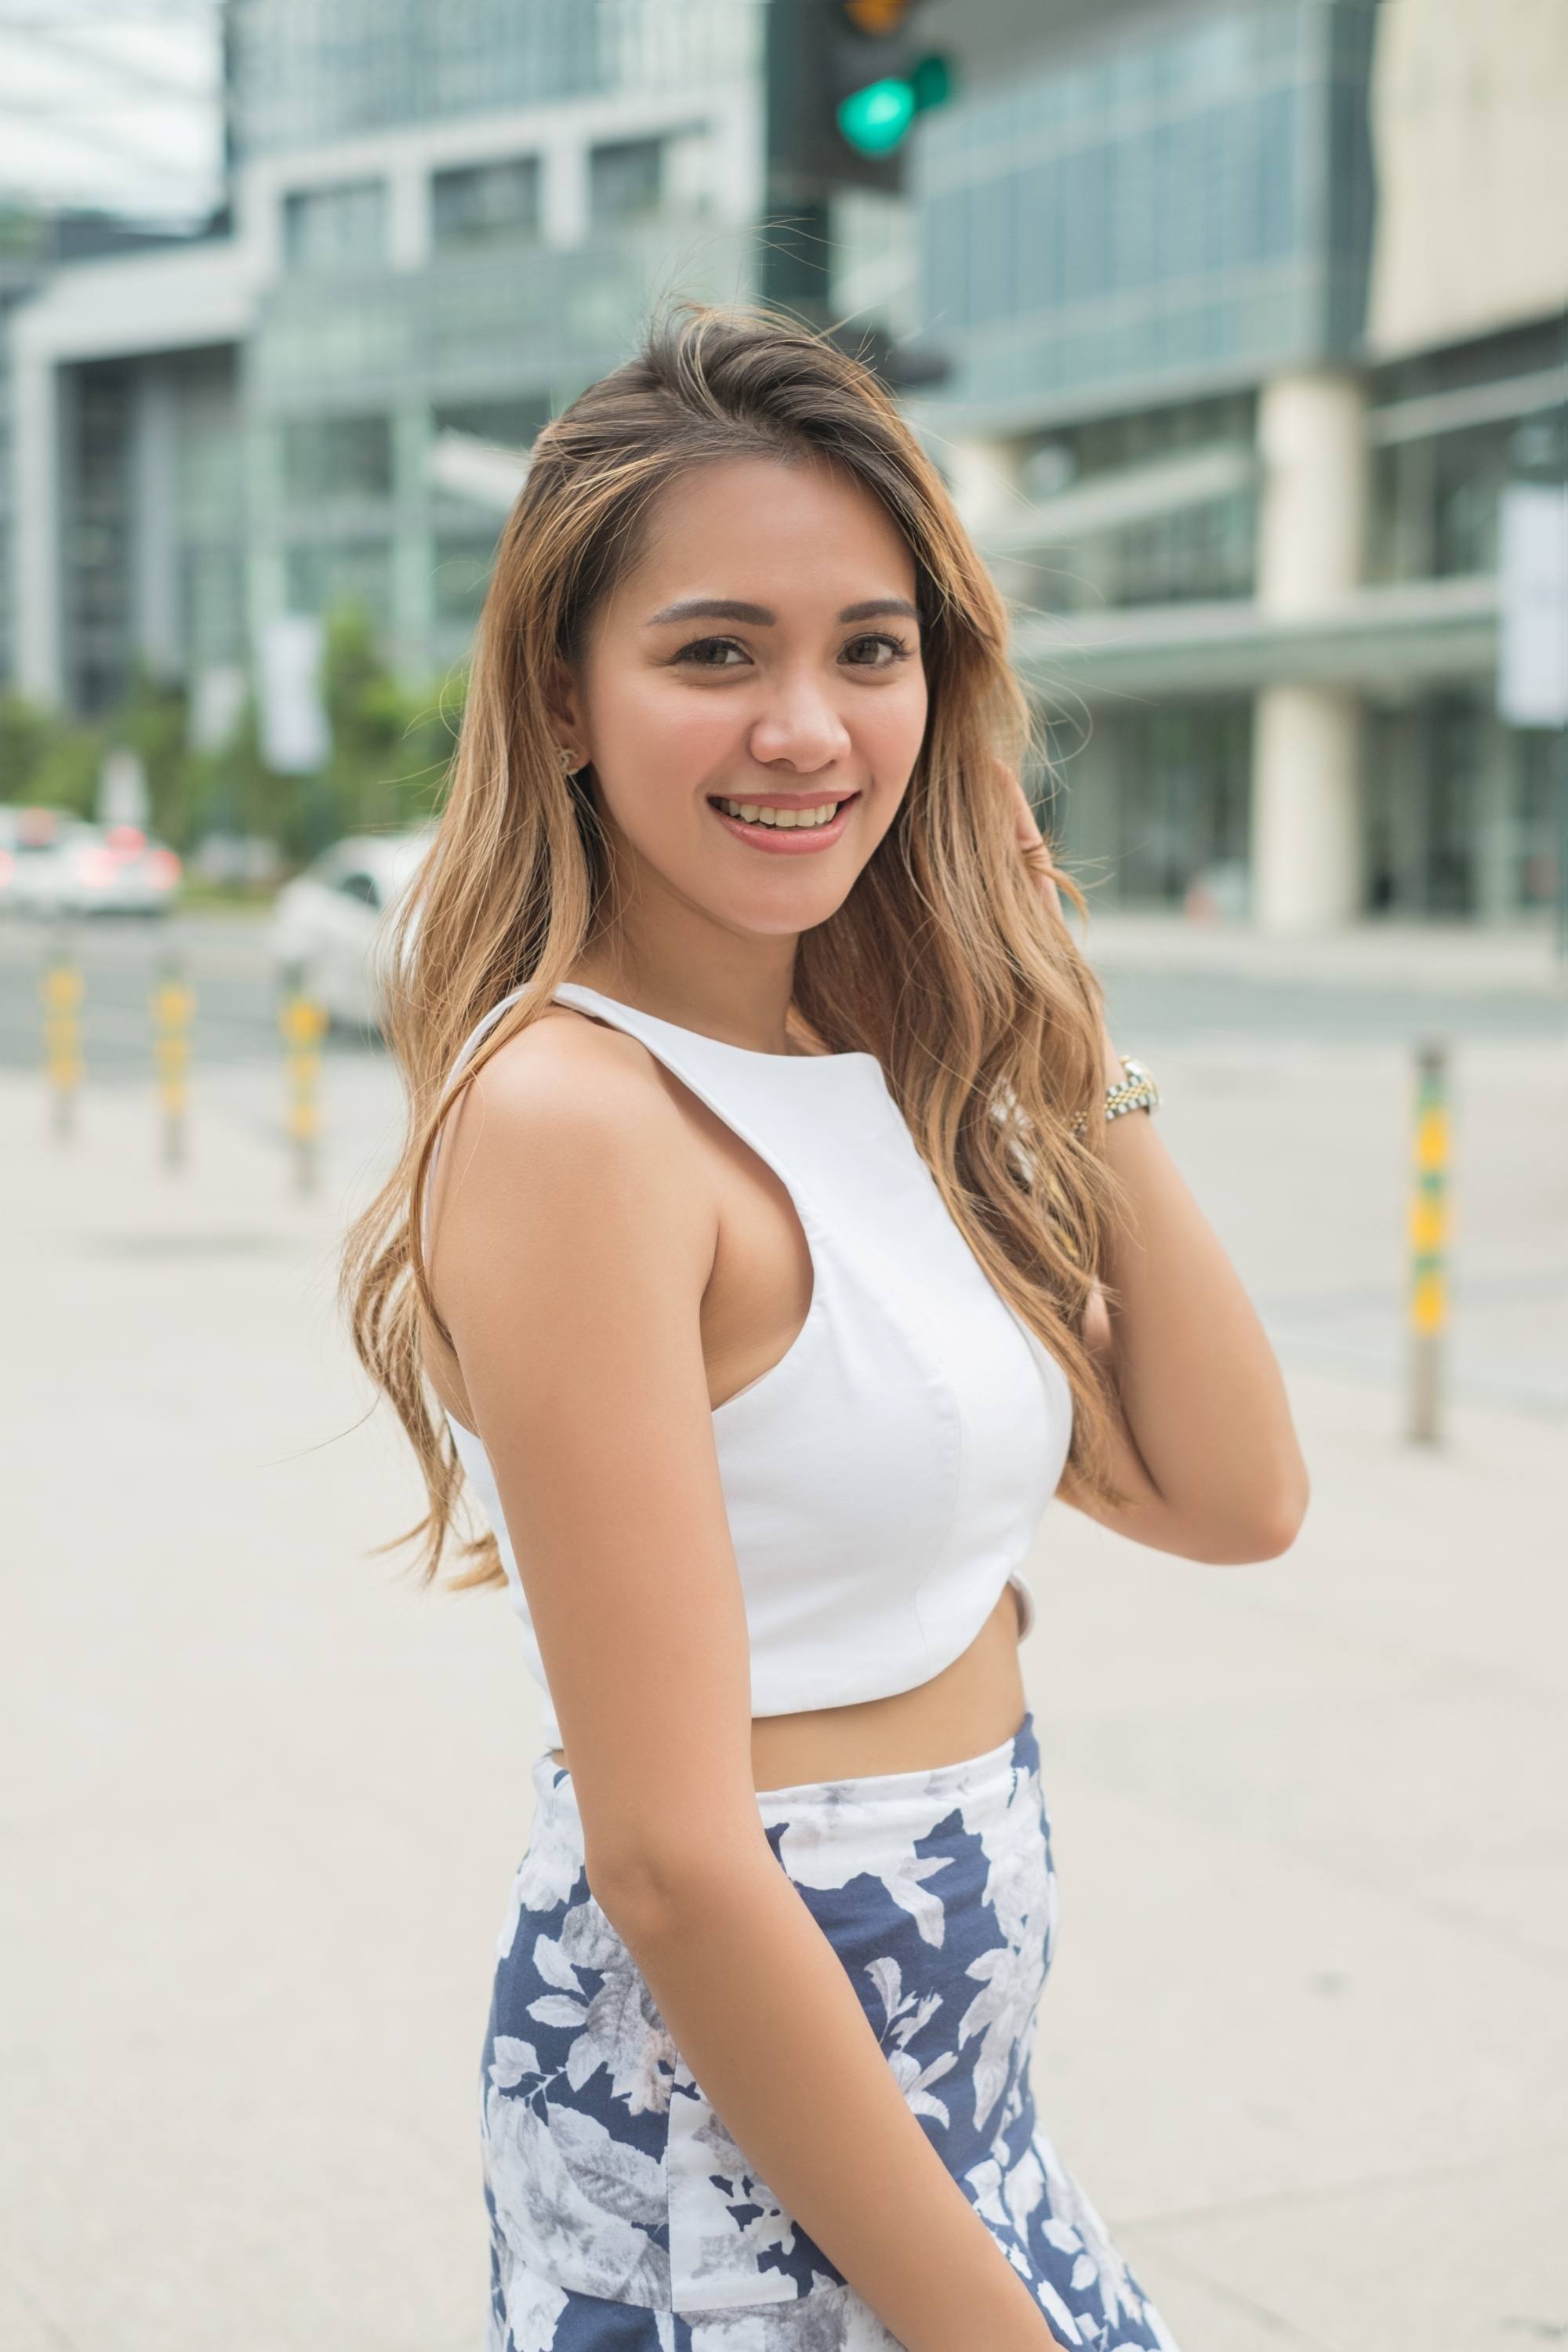 Asian woman with long wavy hair wearing a white top